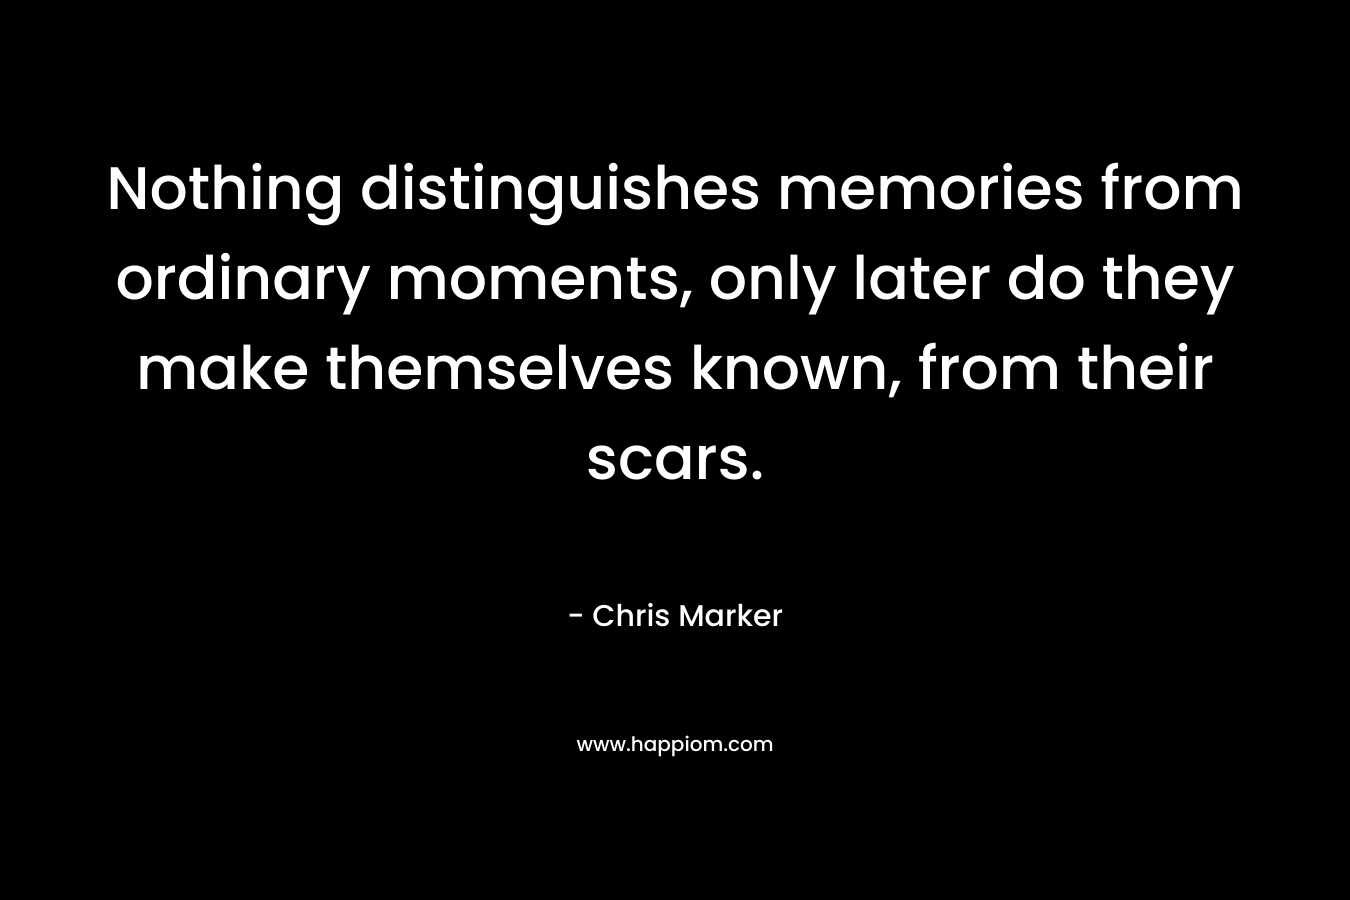 Nothing distinguishes memories from ordinary moments, only later do they make themselves known, from their scars. – Chris Marker